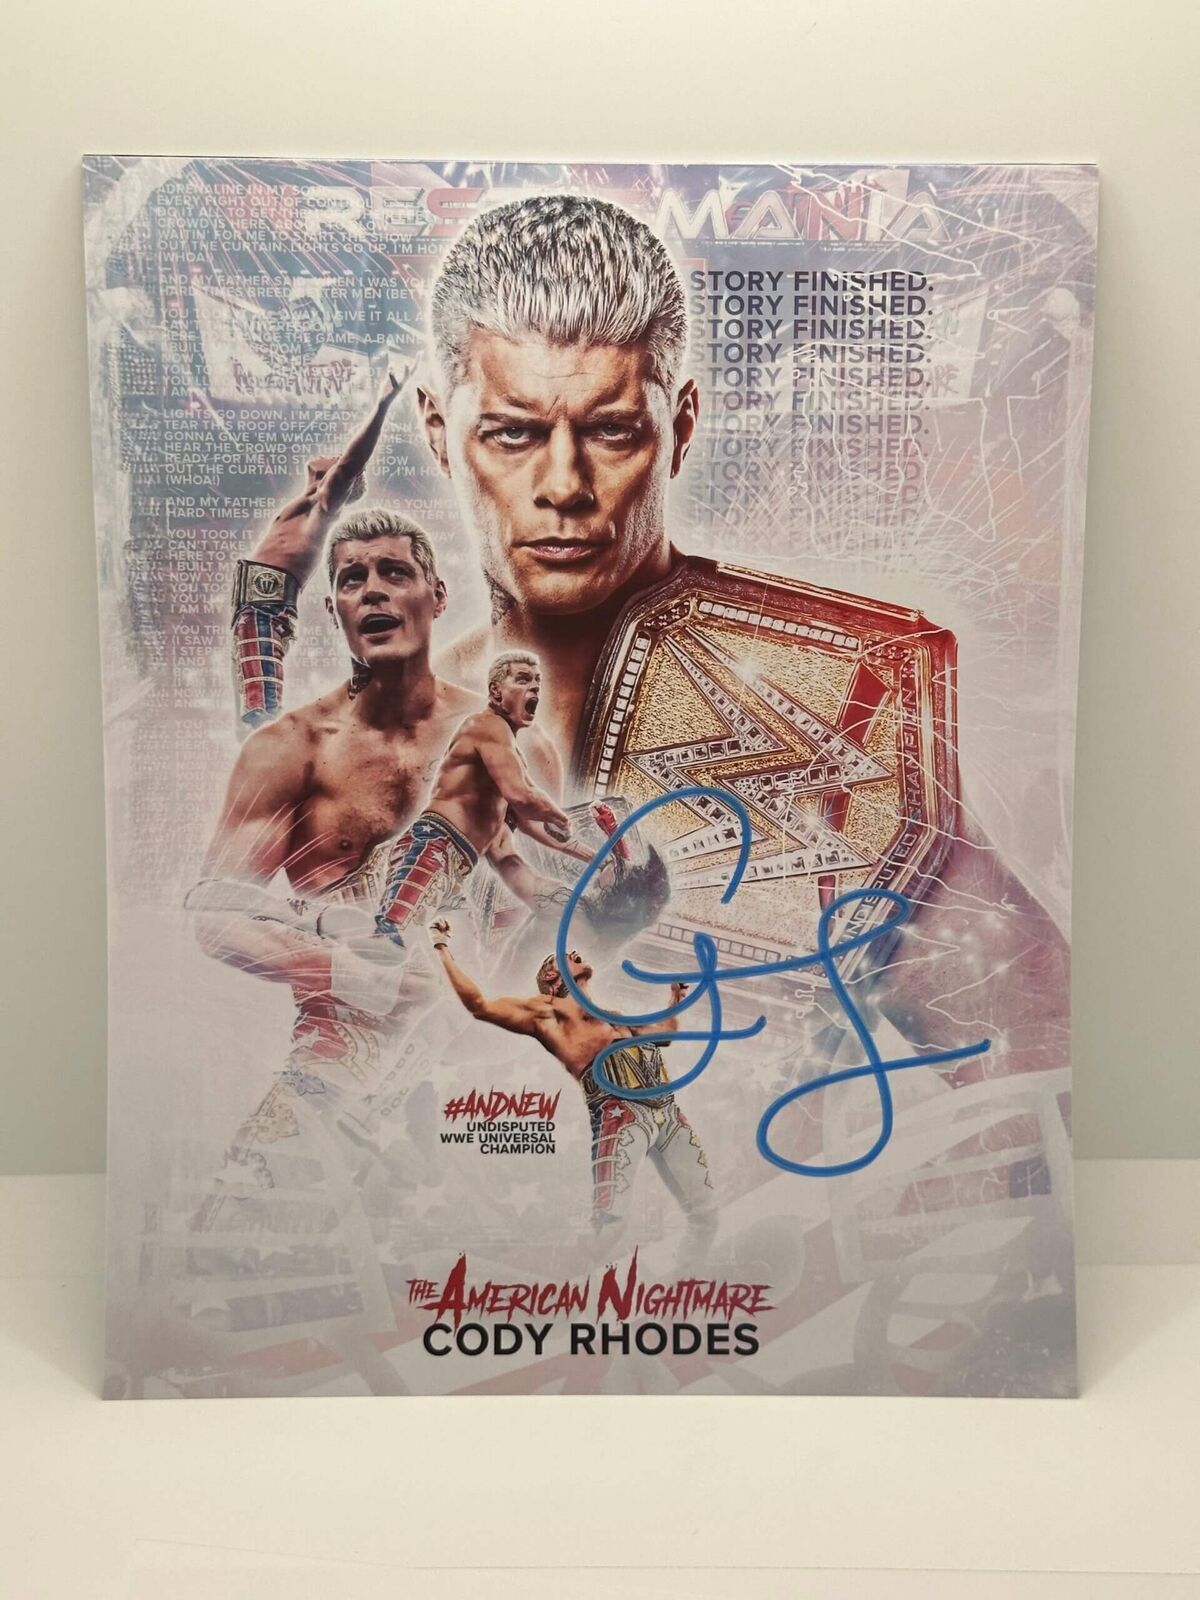 Cody Rhodes Undisputed WWE Champion Signed Autographed Photo Authentic 8X10 COA